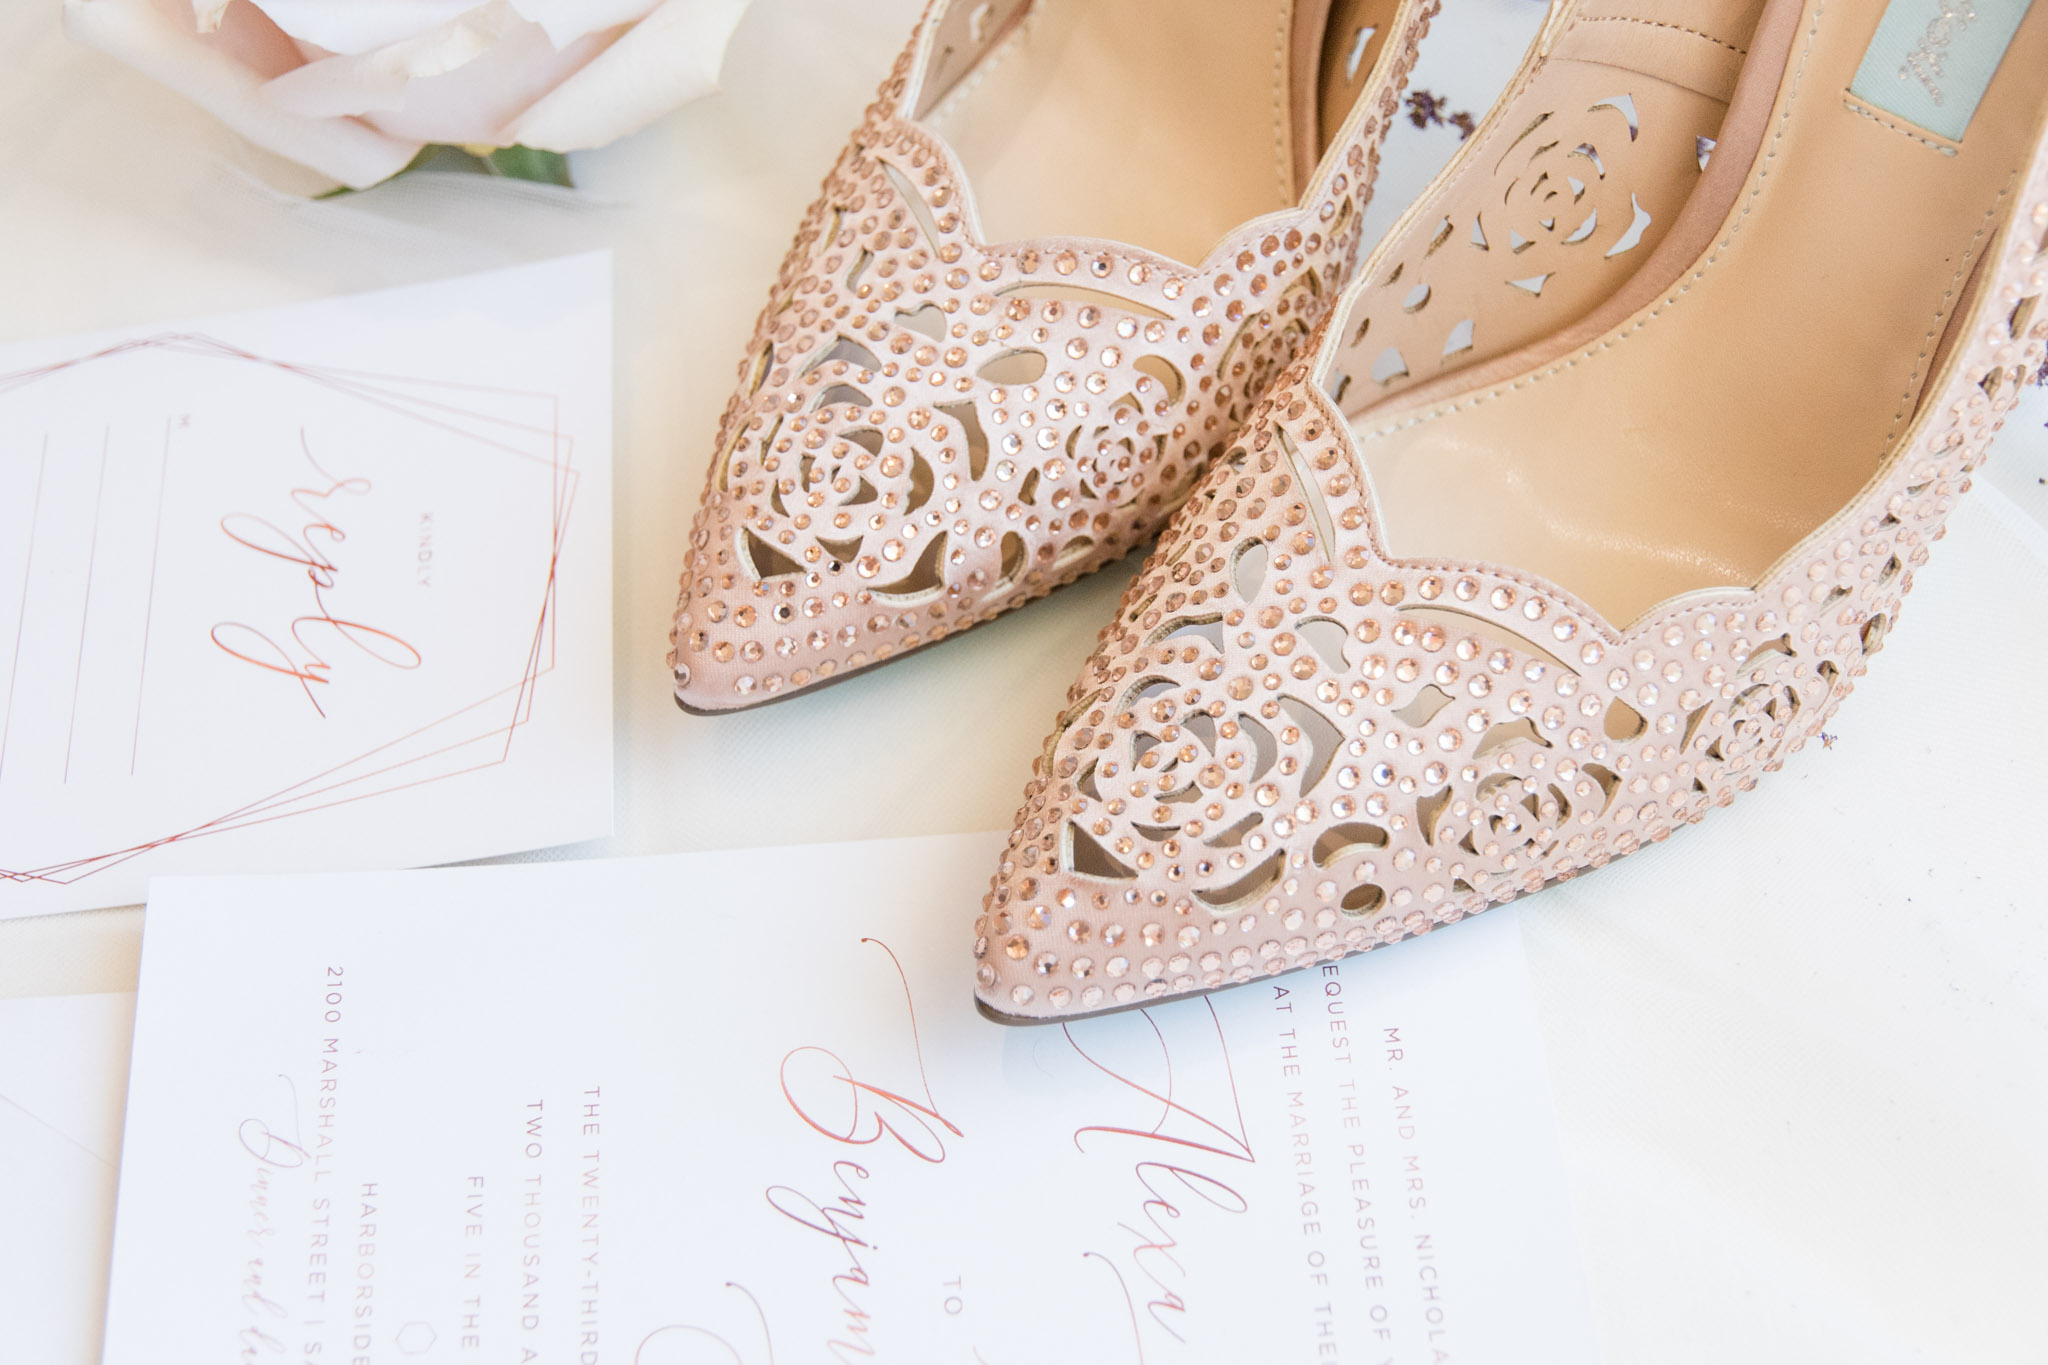 Bride's shoes along with wedding invitations.